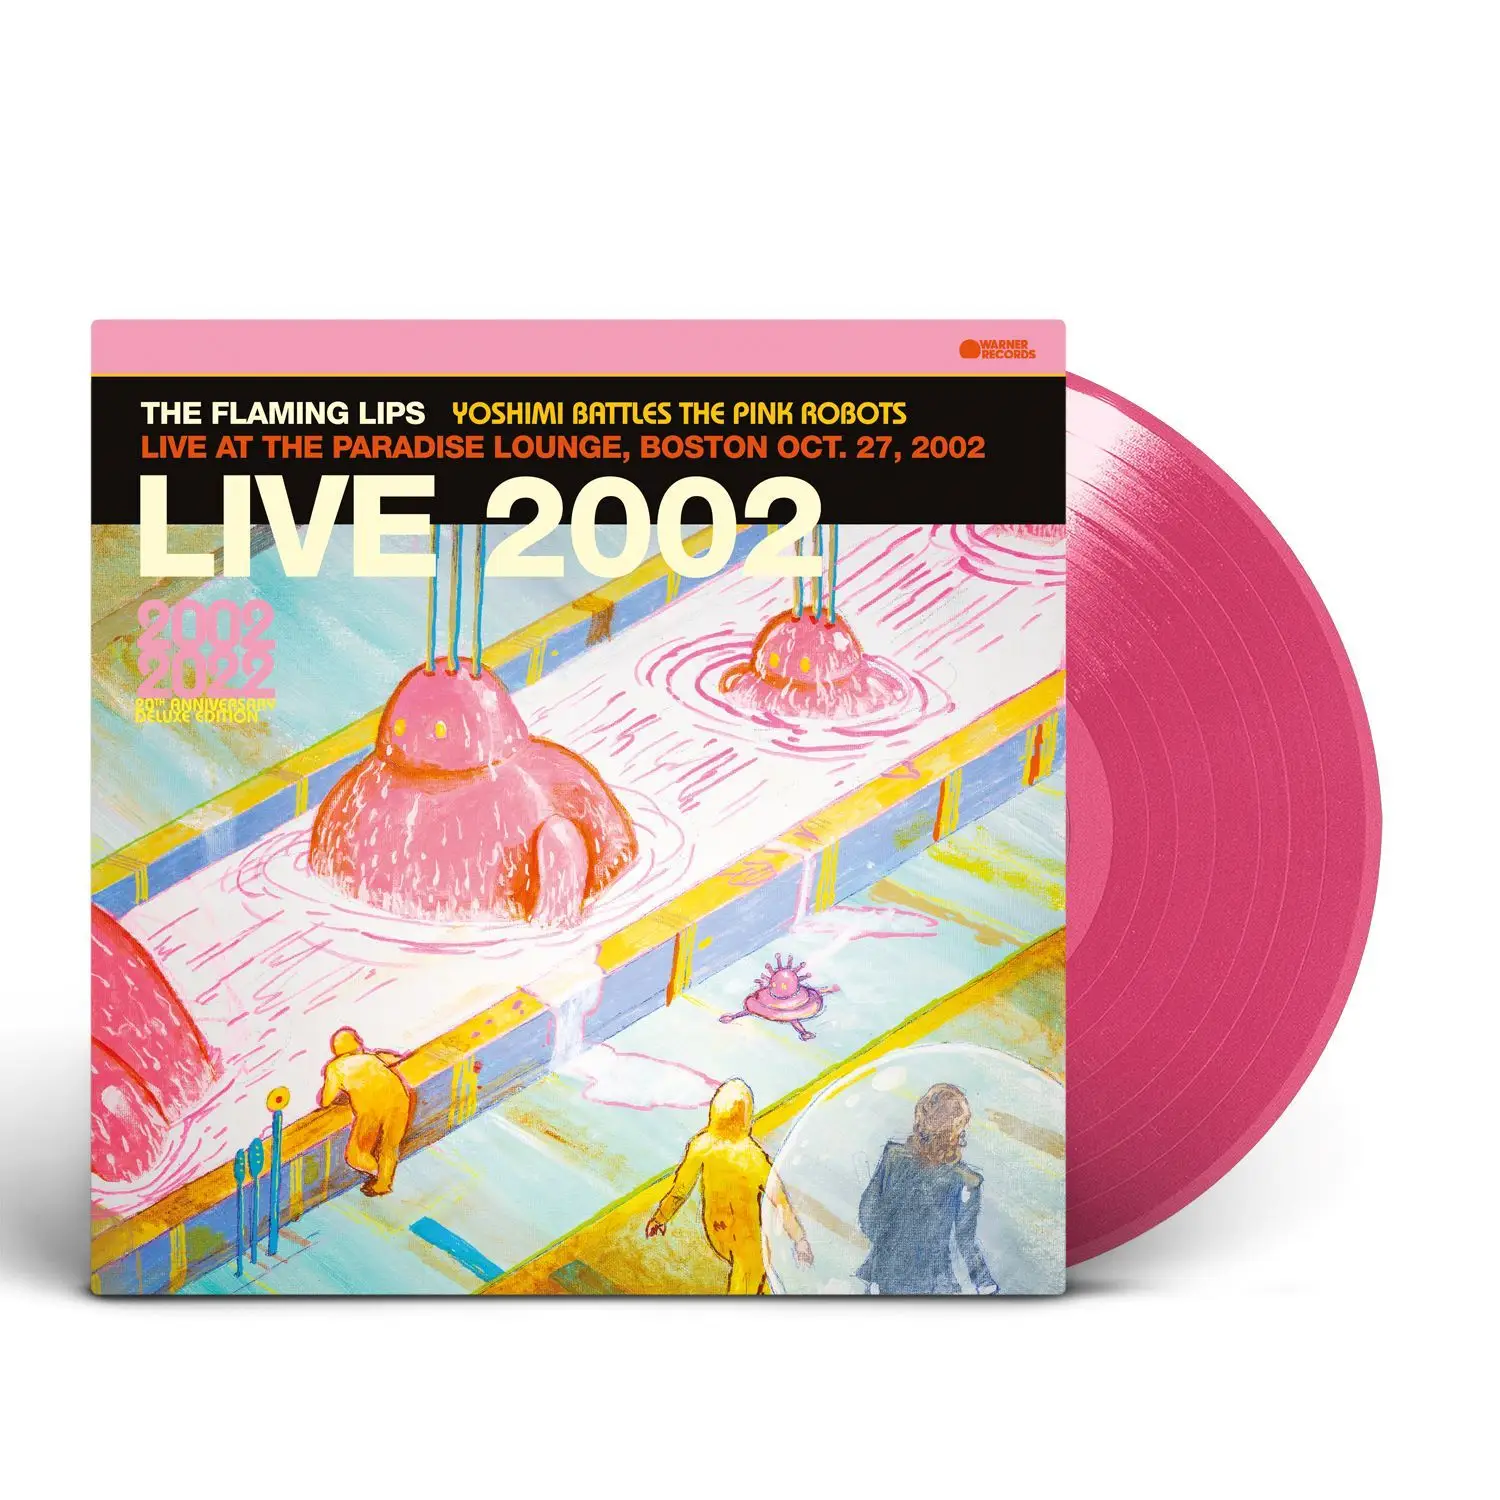 <strong>The Flaming Lips - Yoshimi Battles The Pink Robots - Live at the Paradise Lounge, Boston Oct. 27, 2002 - Black Friday 2023</strong> (Vinyl LP - pink)